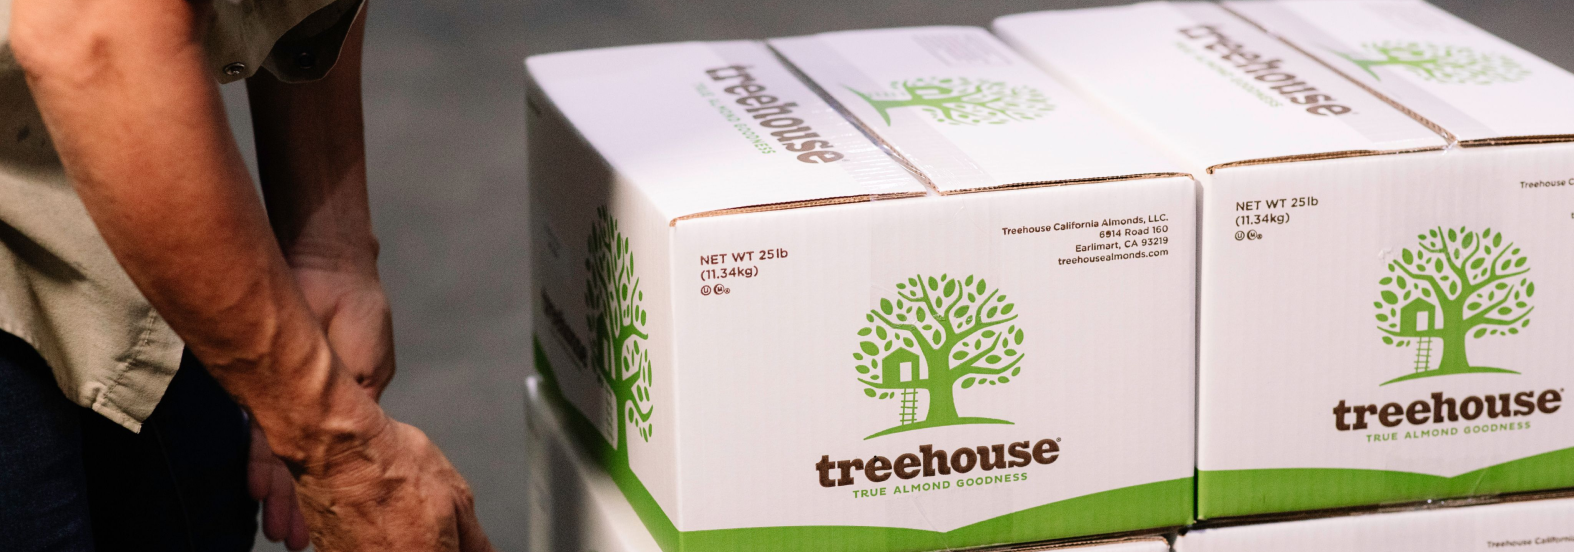 Boxes of Treehouse Almond Products